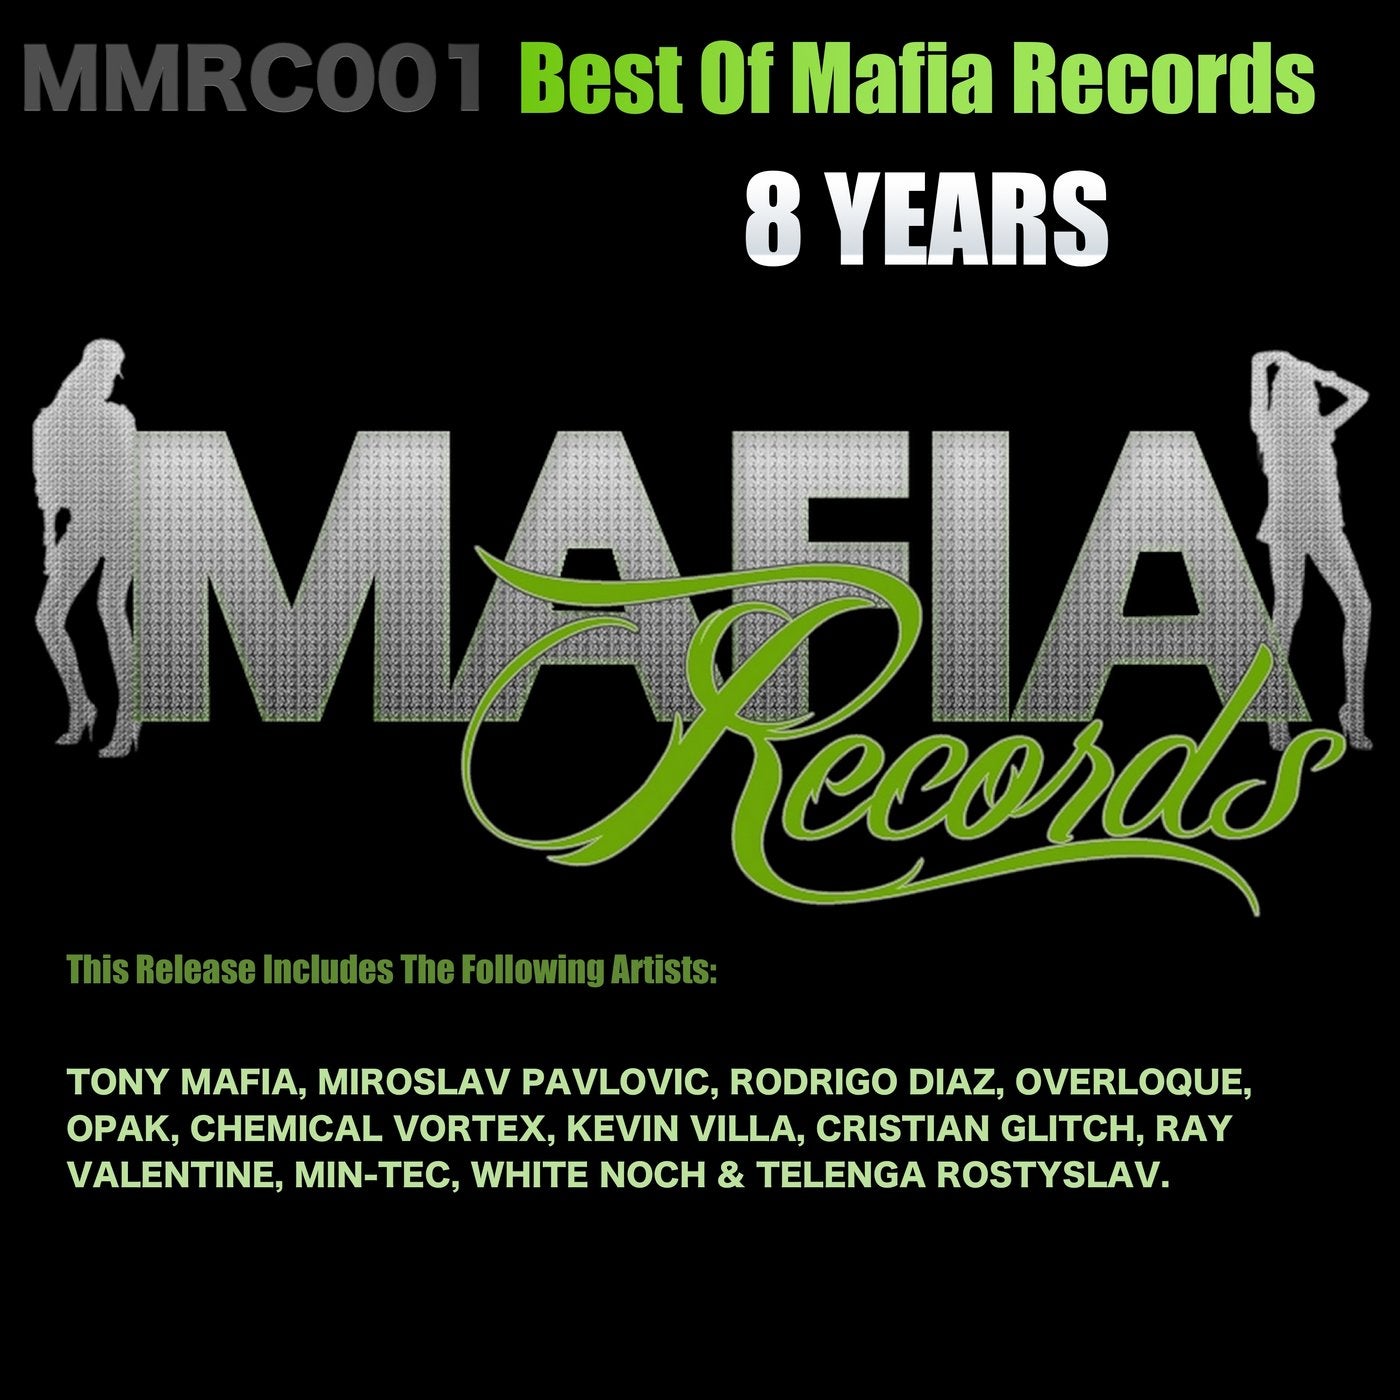 Best of Mafia Records 8 Years